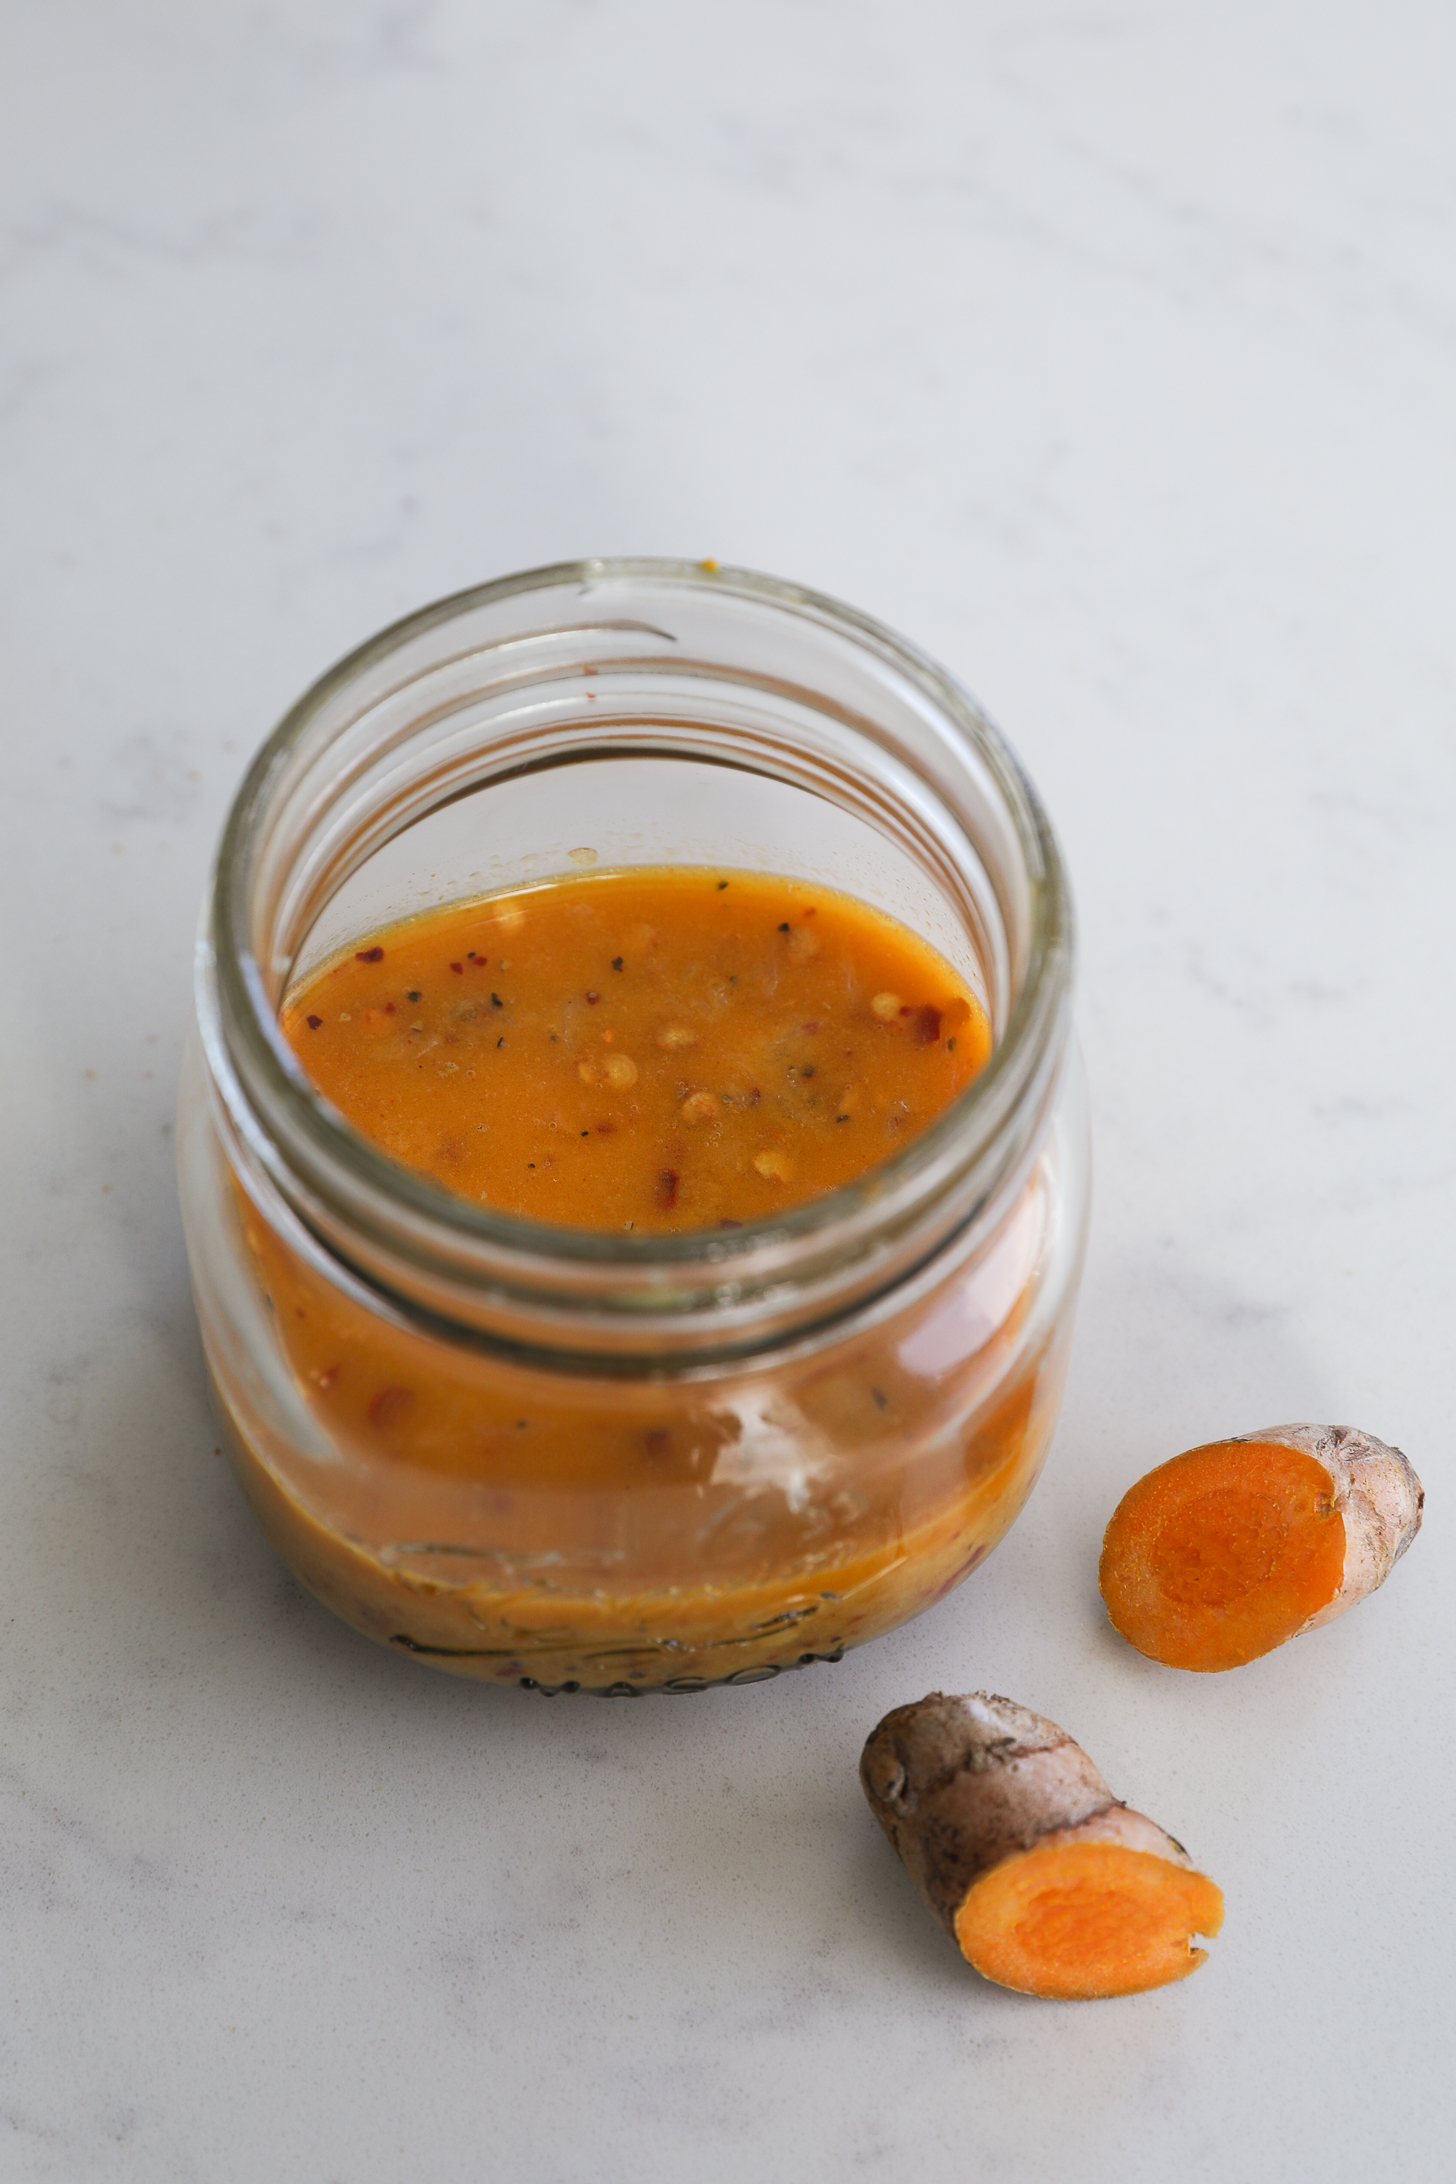 Perspective image of an open mason jar showing an orange-coloured dressing with fresh turmeric root nearby.